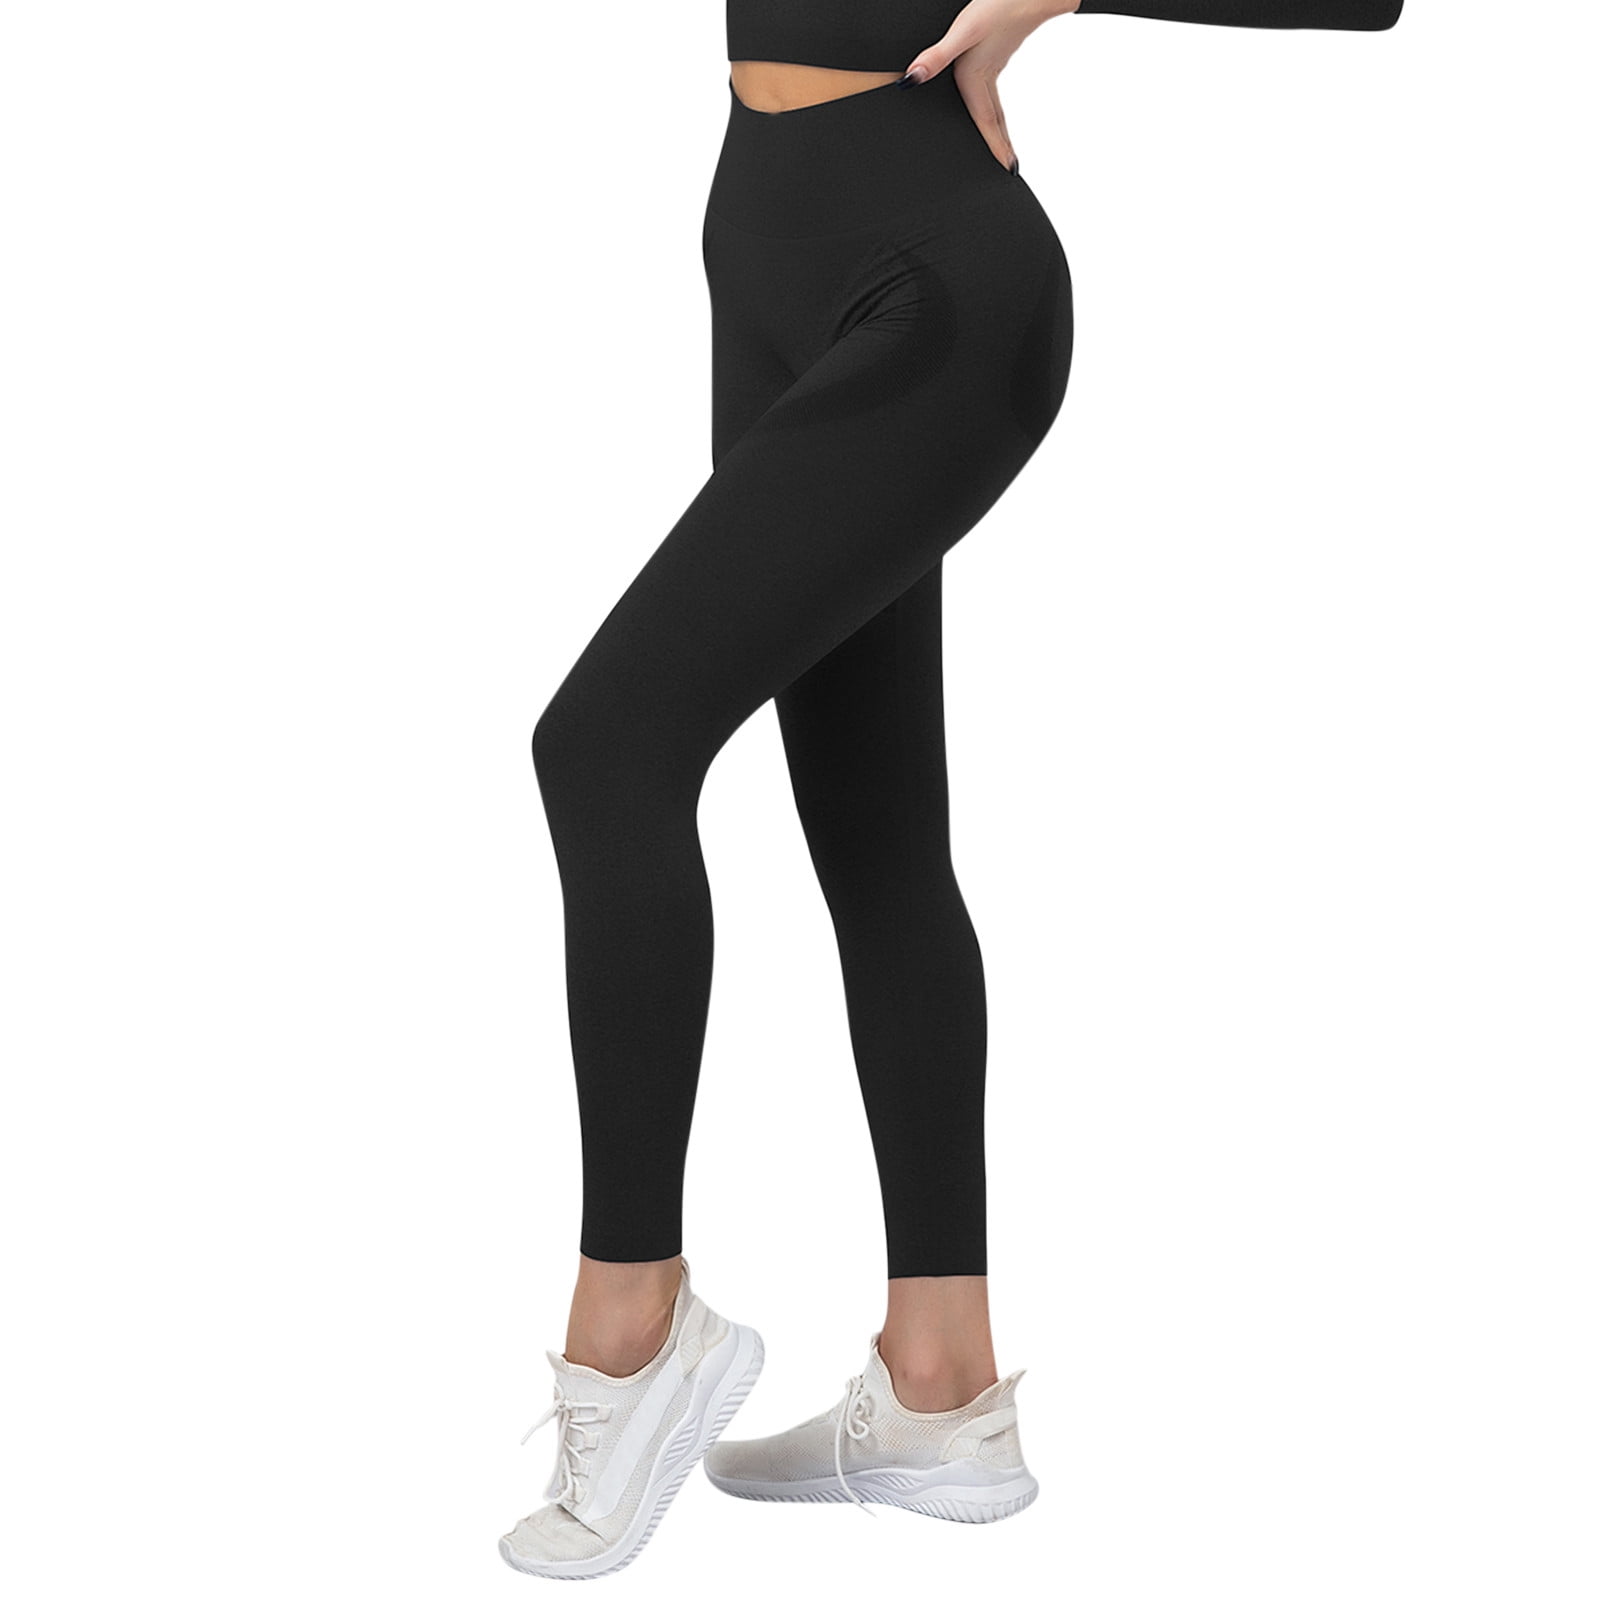 Thick High Waist Yoga Pants With Pockets, Tummy Control Workout Running  Yoga Leggings For Women#d921204